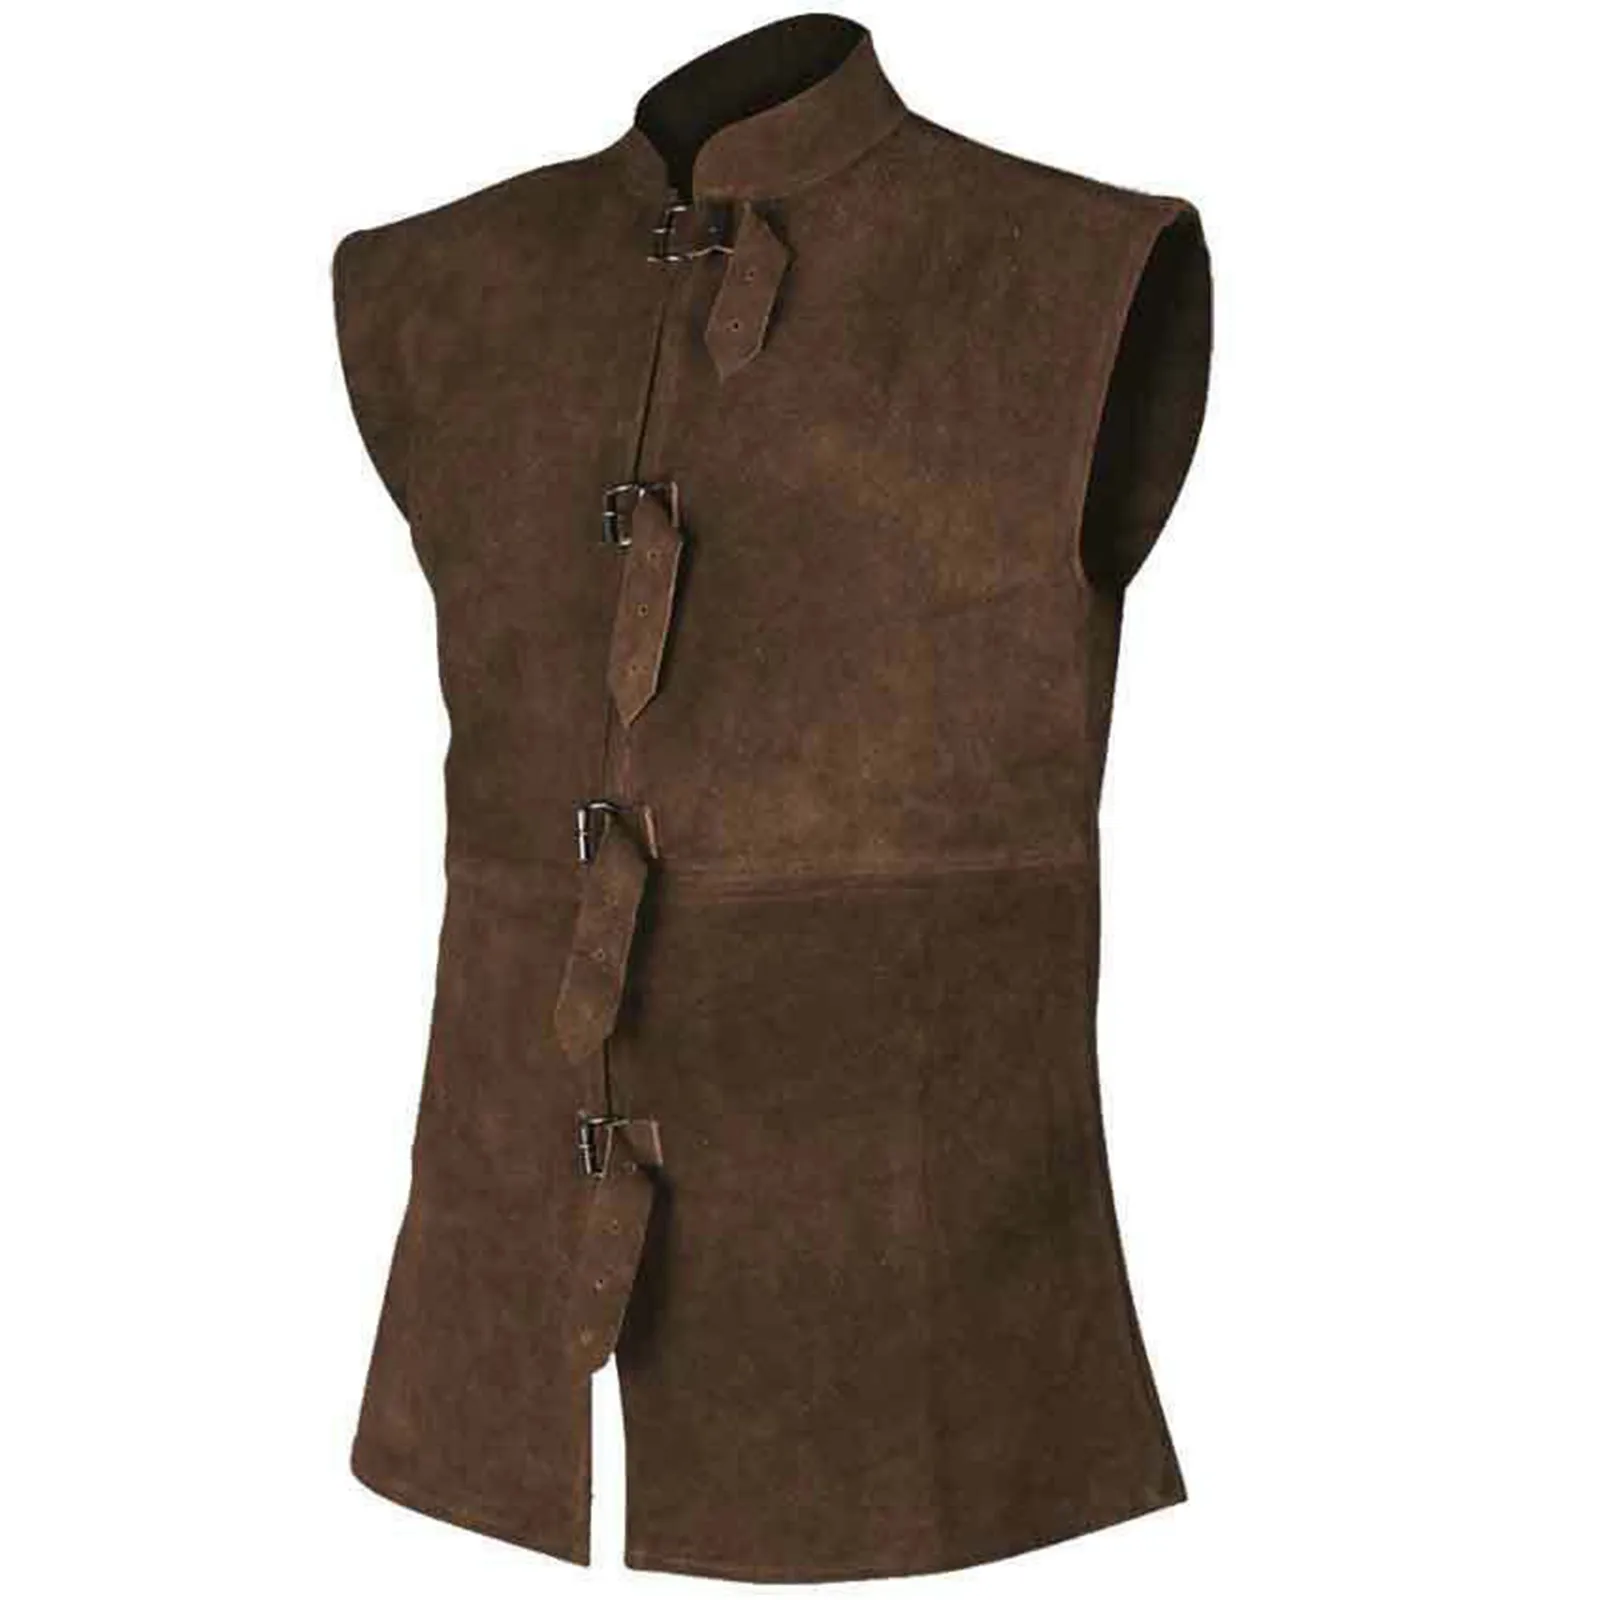 Vintage Suede Waistcoat Men Sleeveless Solid Color Stand-Up Collar Buttons Coat Vest Spring Autumn Medieval Retro Suit Vest Male autumn winter korean fashion polo neck letter printed jacket male casual fashion buttons coat top homme loose cardigan outwear